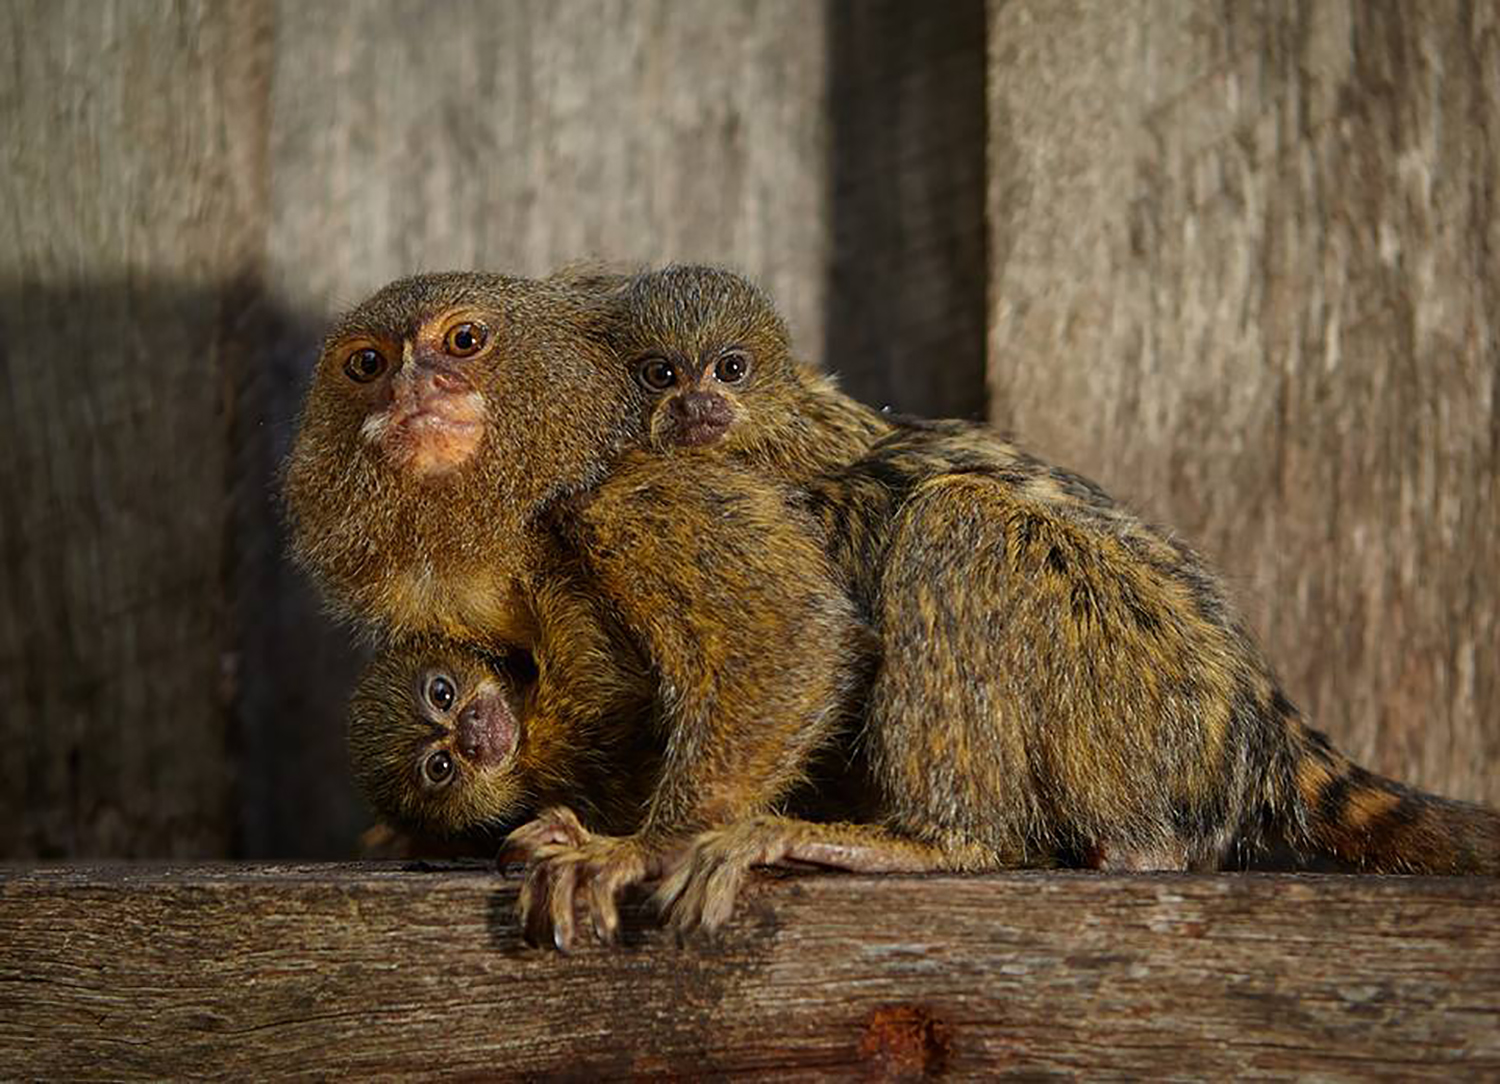 This undated handout photo downloaded from the Symbio Wildlife Park's facebook page shows Pygmy marmosets at the Symbio Wildlife Park in Sydney.   One of the four week old baby was reunited with mum and the remaining family members as police arrested two men on charges of stealing pygmy marmosets from the wildlife park. / AFP PHOTO / SYMBIO WILDLIFE PARK / MICK MARIC / --RESTRICTED TO EDITORIAL USE- MANDATORY CREDIT "AFP PHOTO / SYMBIO WILDLIFE PARK" - NO MARKETING AND ADVERTISING CAMPAIGNS - DISTRIBUTED AS A SERVICE TO CLIENTS- NO ARCHIEVE